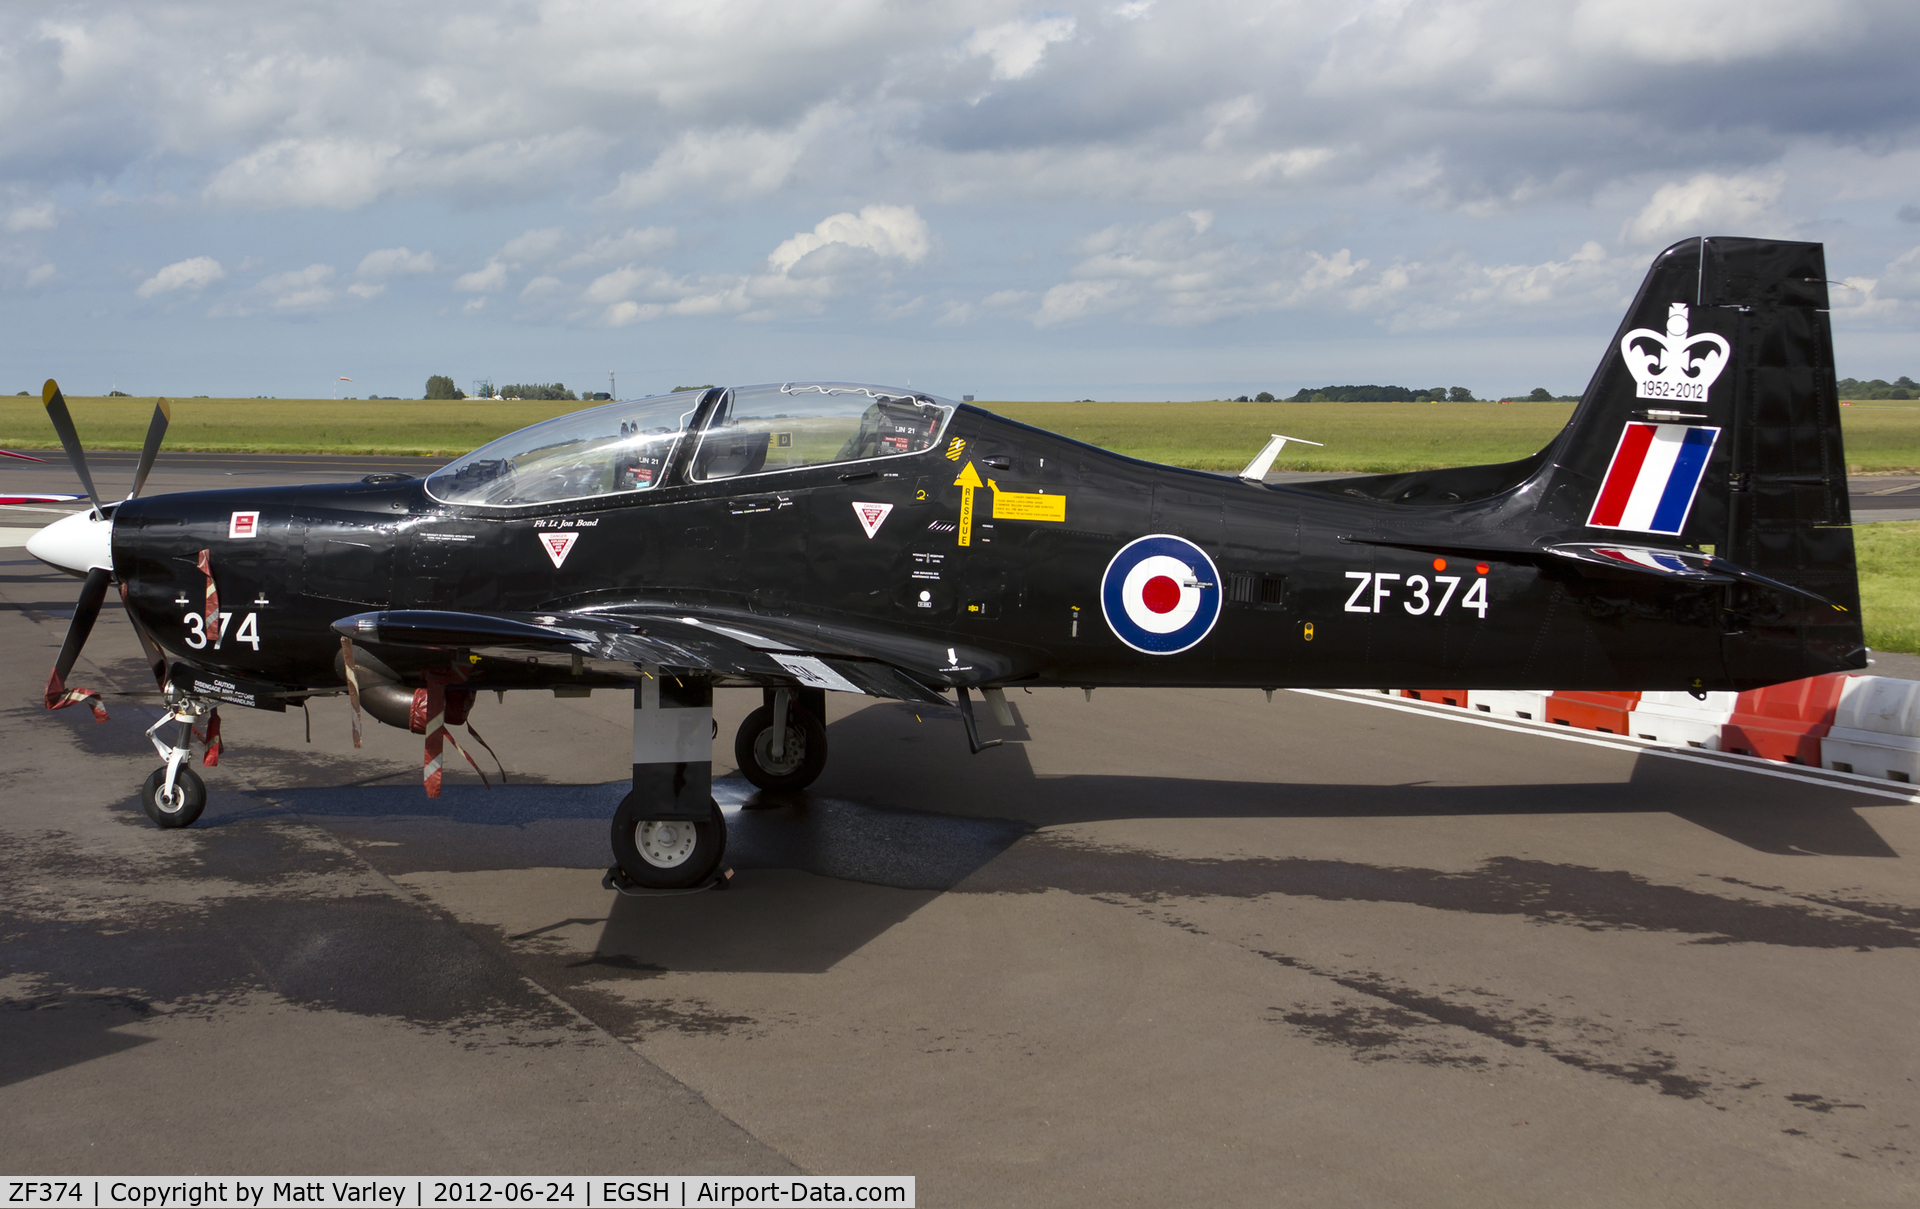 ZF374, 1992 Short S-312 Tucano T1 C/N S117/T88, Twister 1 sat on stand at SaxonAir.